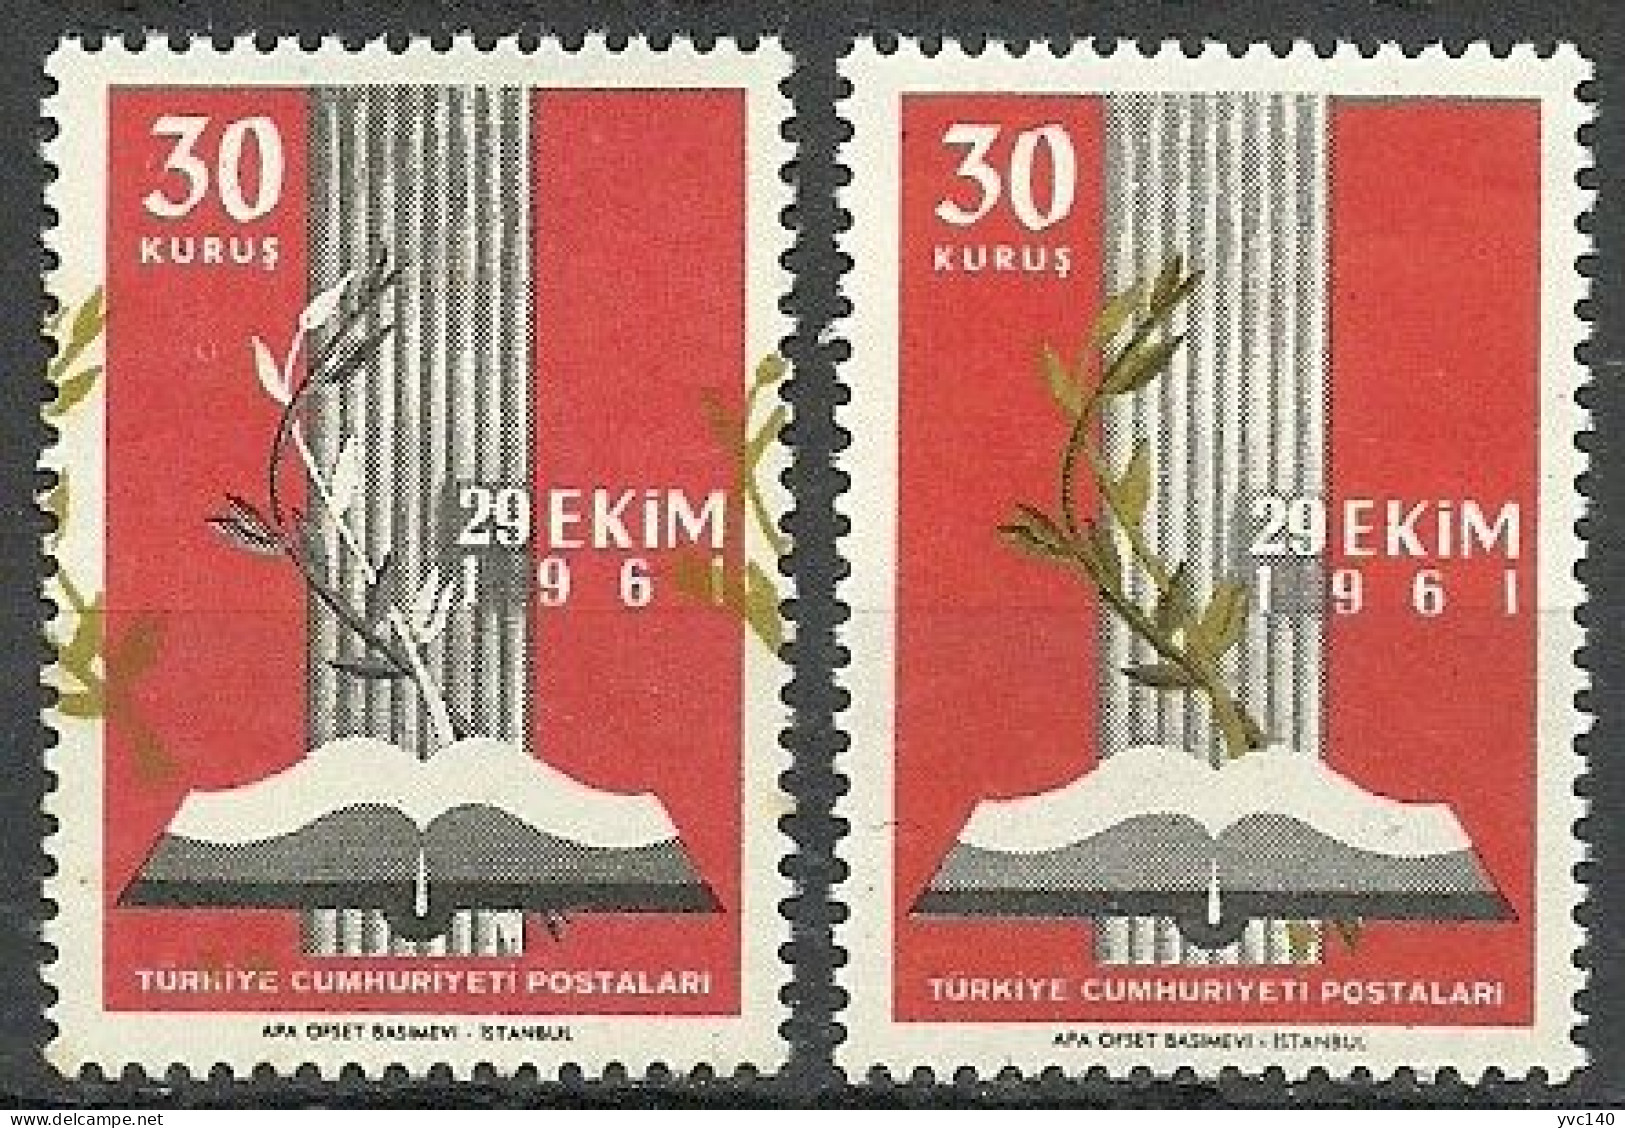 Turkey; 1961 Occasion Of The Inauguration Of The Turkish Parliement 30 K. ERROR "Shifted Print (Yellow Color)" - Unused Stamps